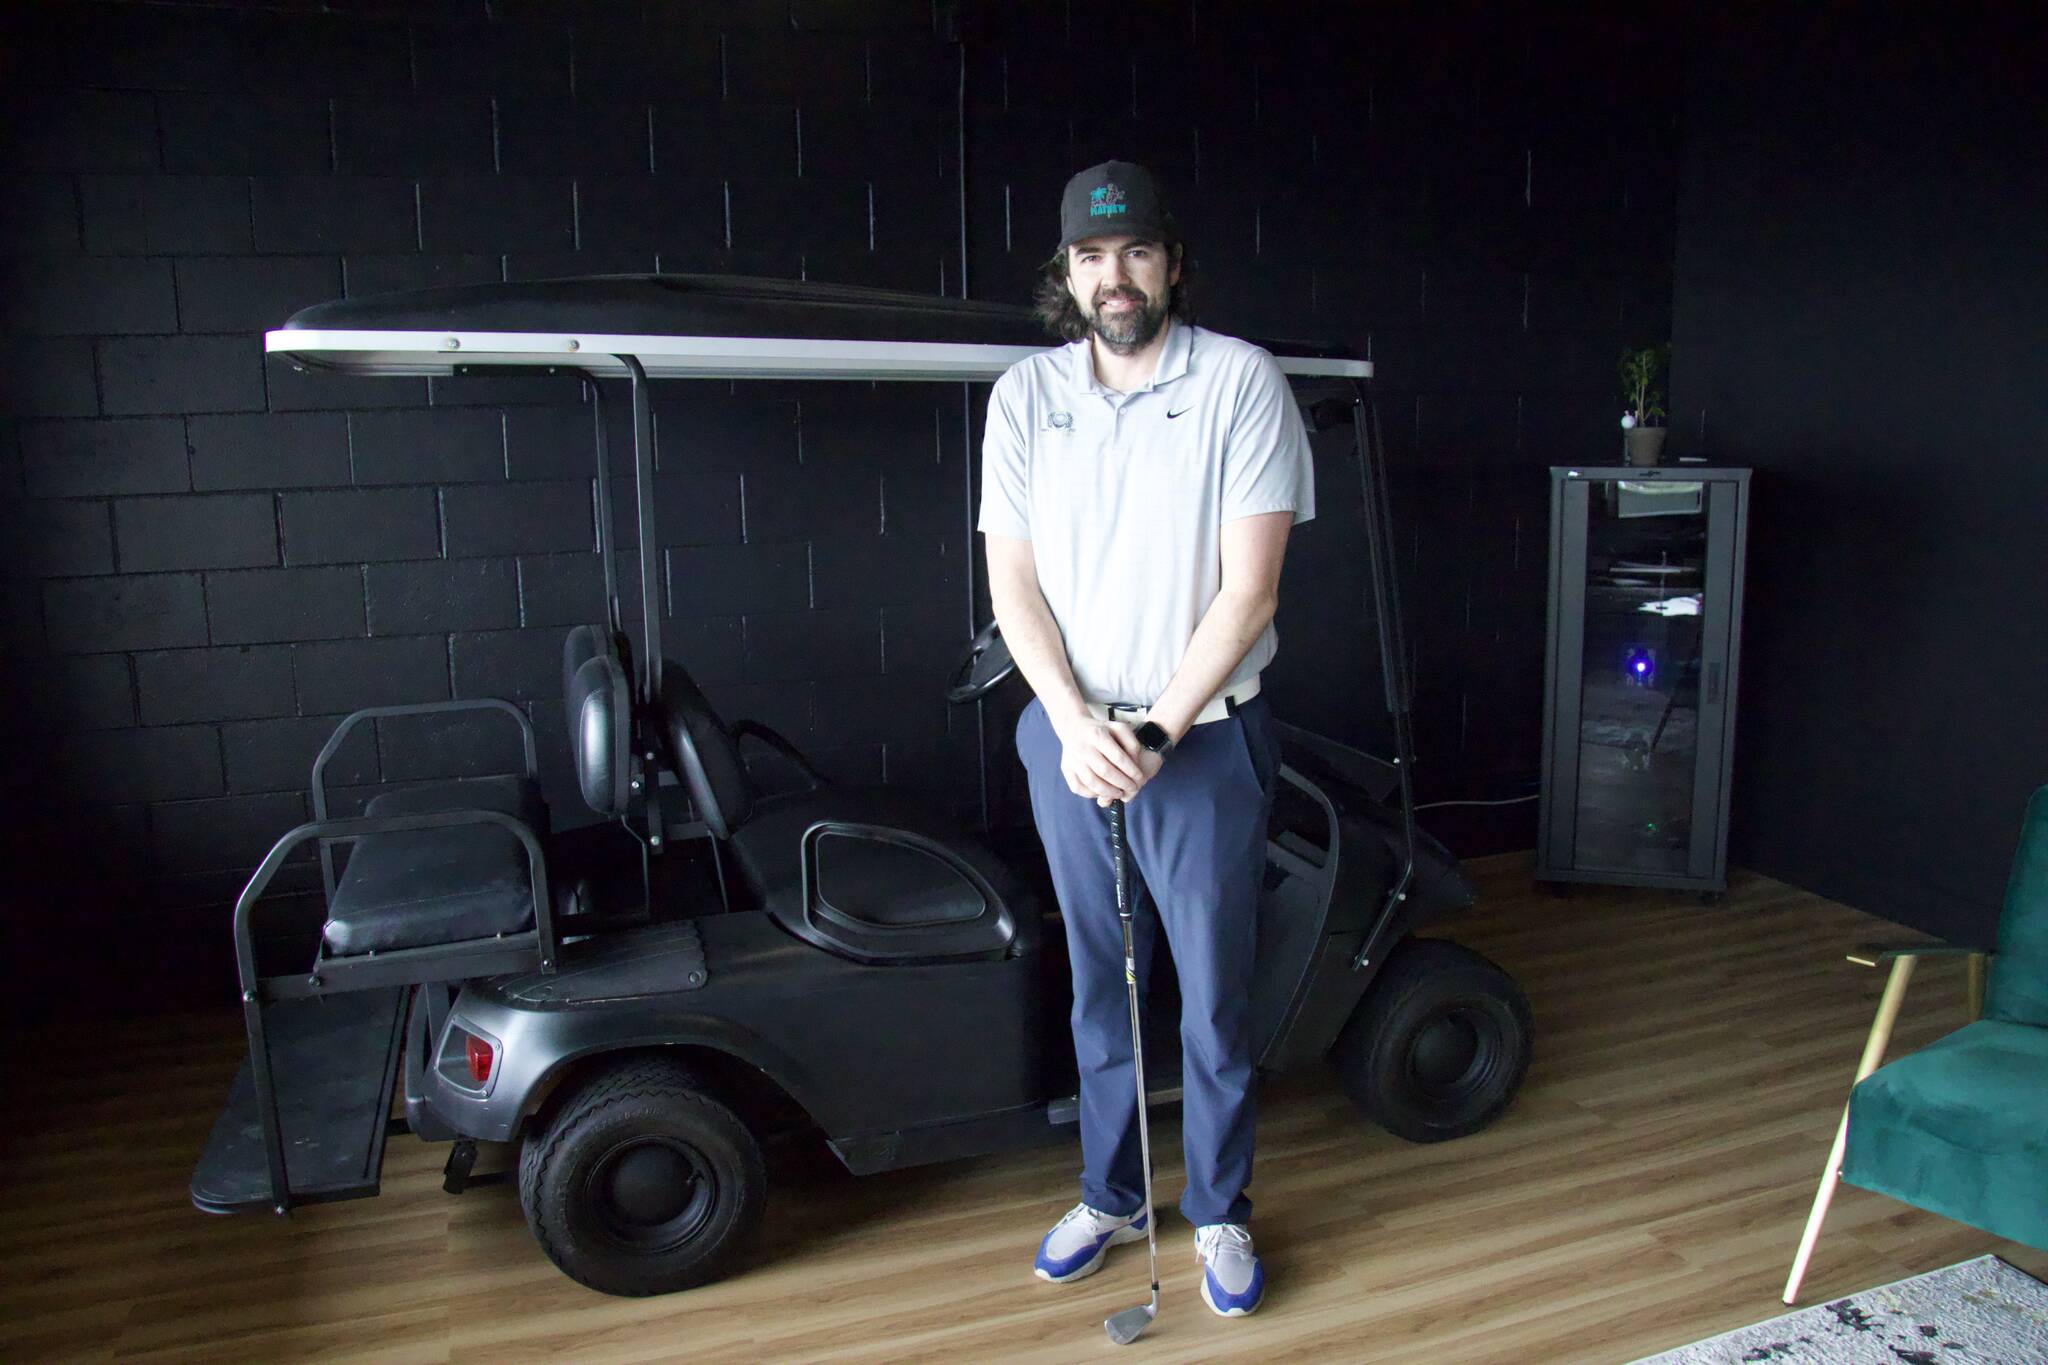 Photo by Rachel Rosen/Whidbey News-Times
Josh Ray recently opened a golf simulator business on Pioneer Way.